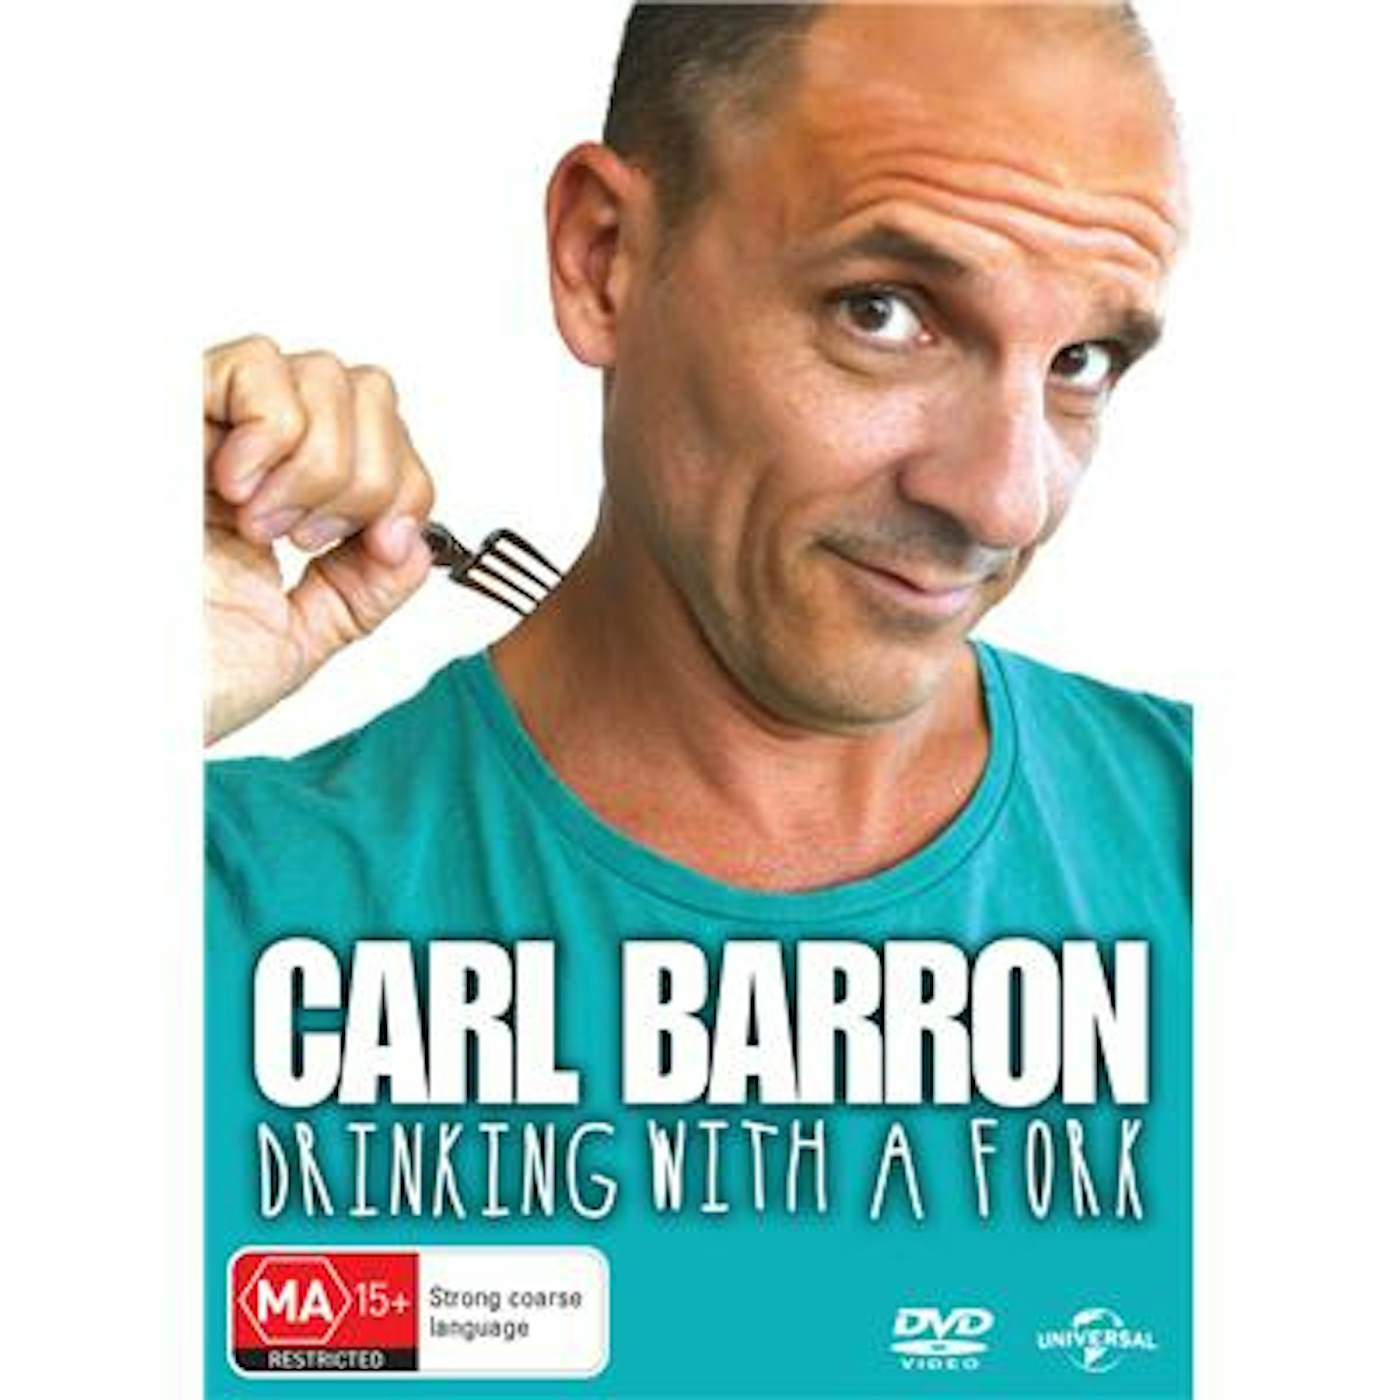 Carl Barron - Drinking with a Fork